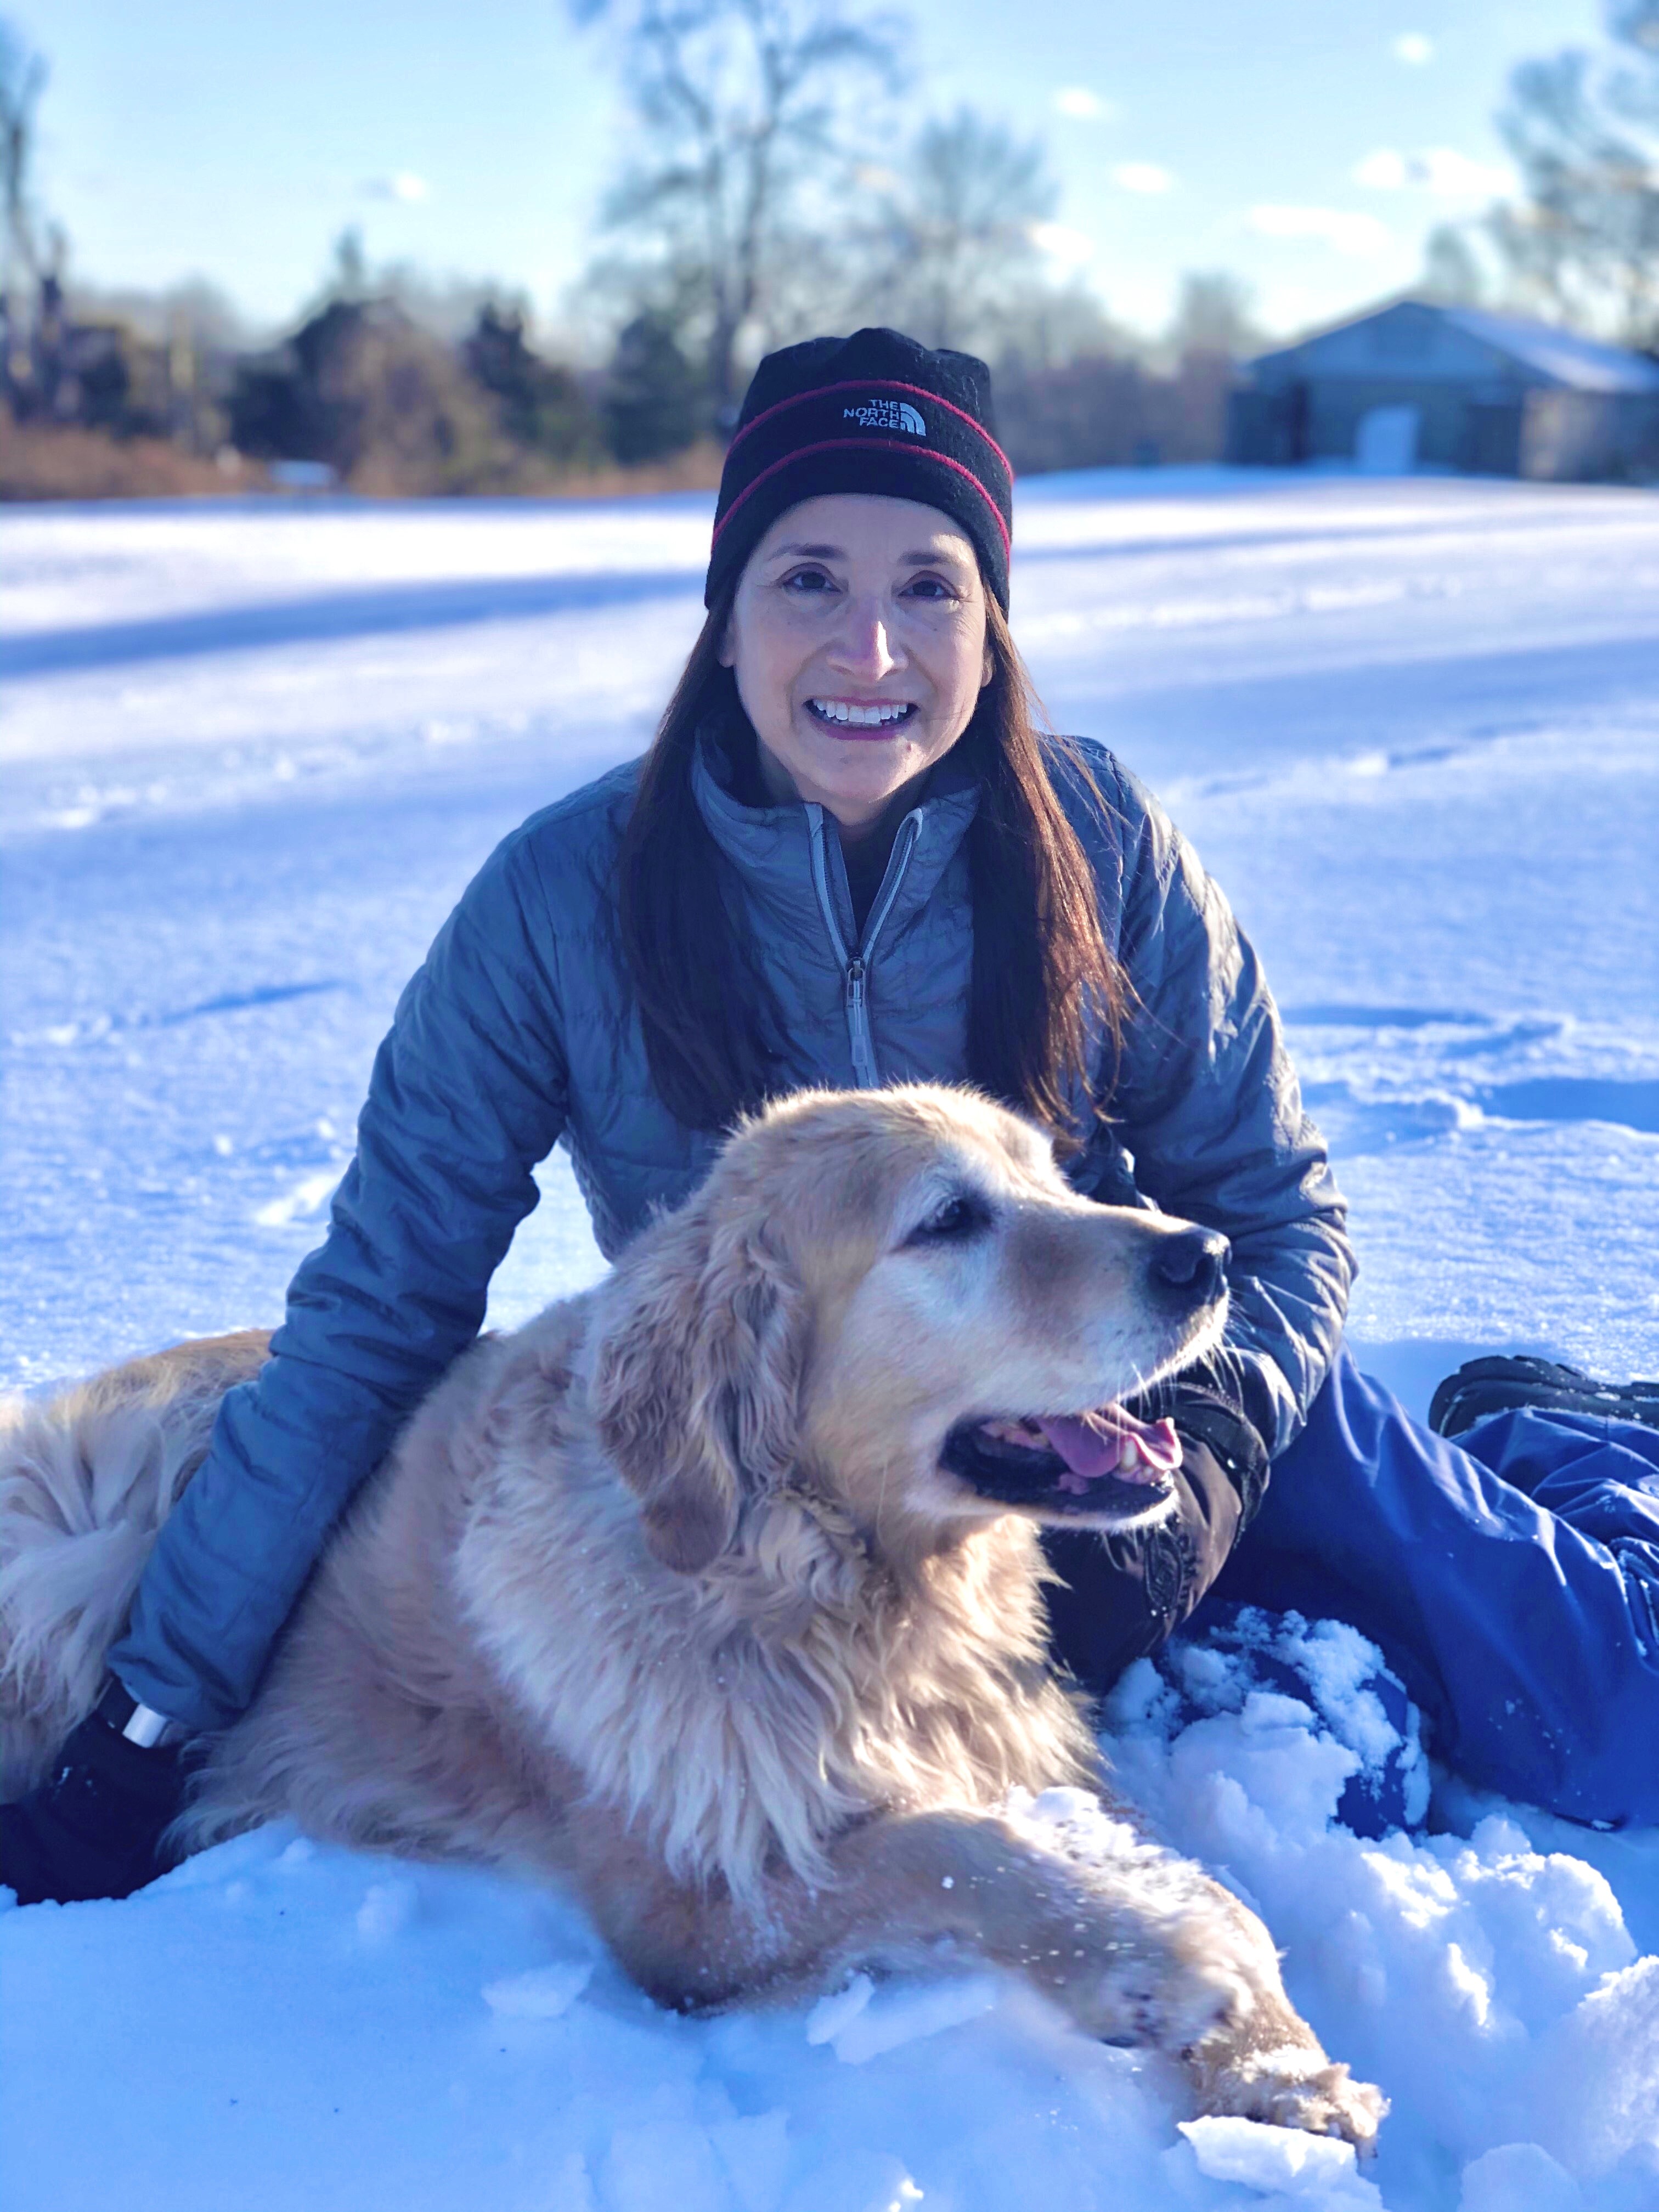 Connecticut Volunteer Linda sitting in snow with her dog